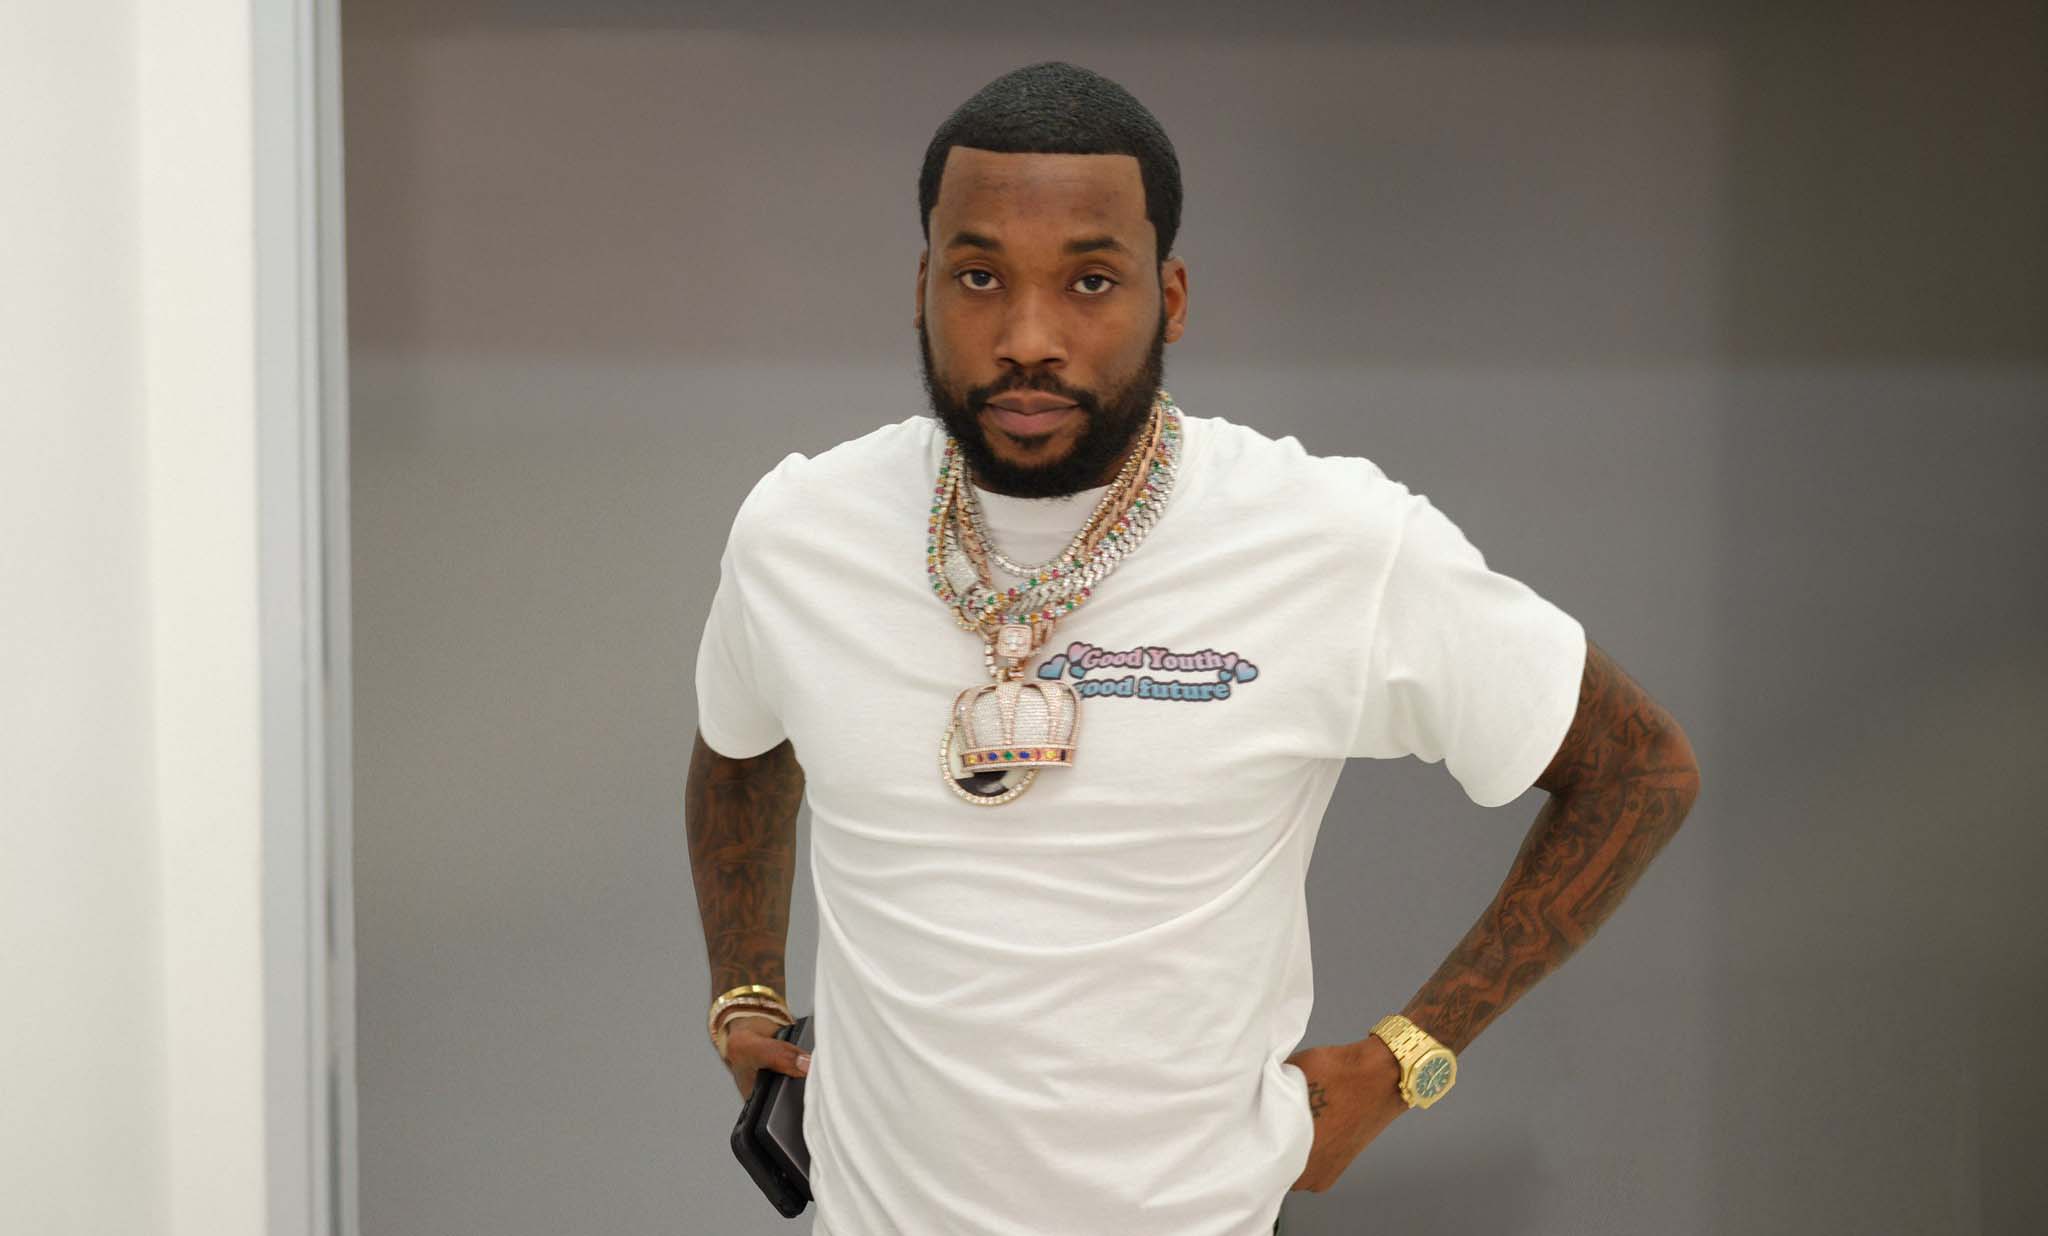 Meek Mill Outfit from April 19, 2021, WHAT'S ON THE STAR?